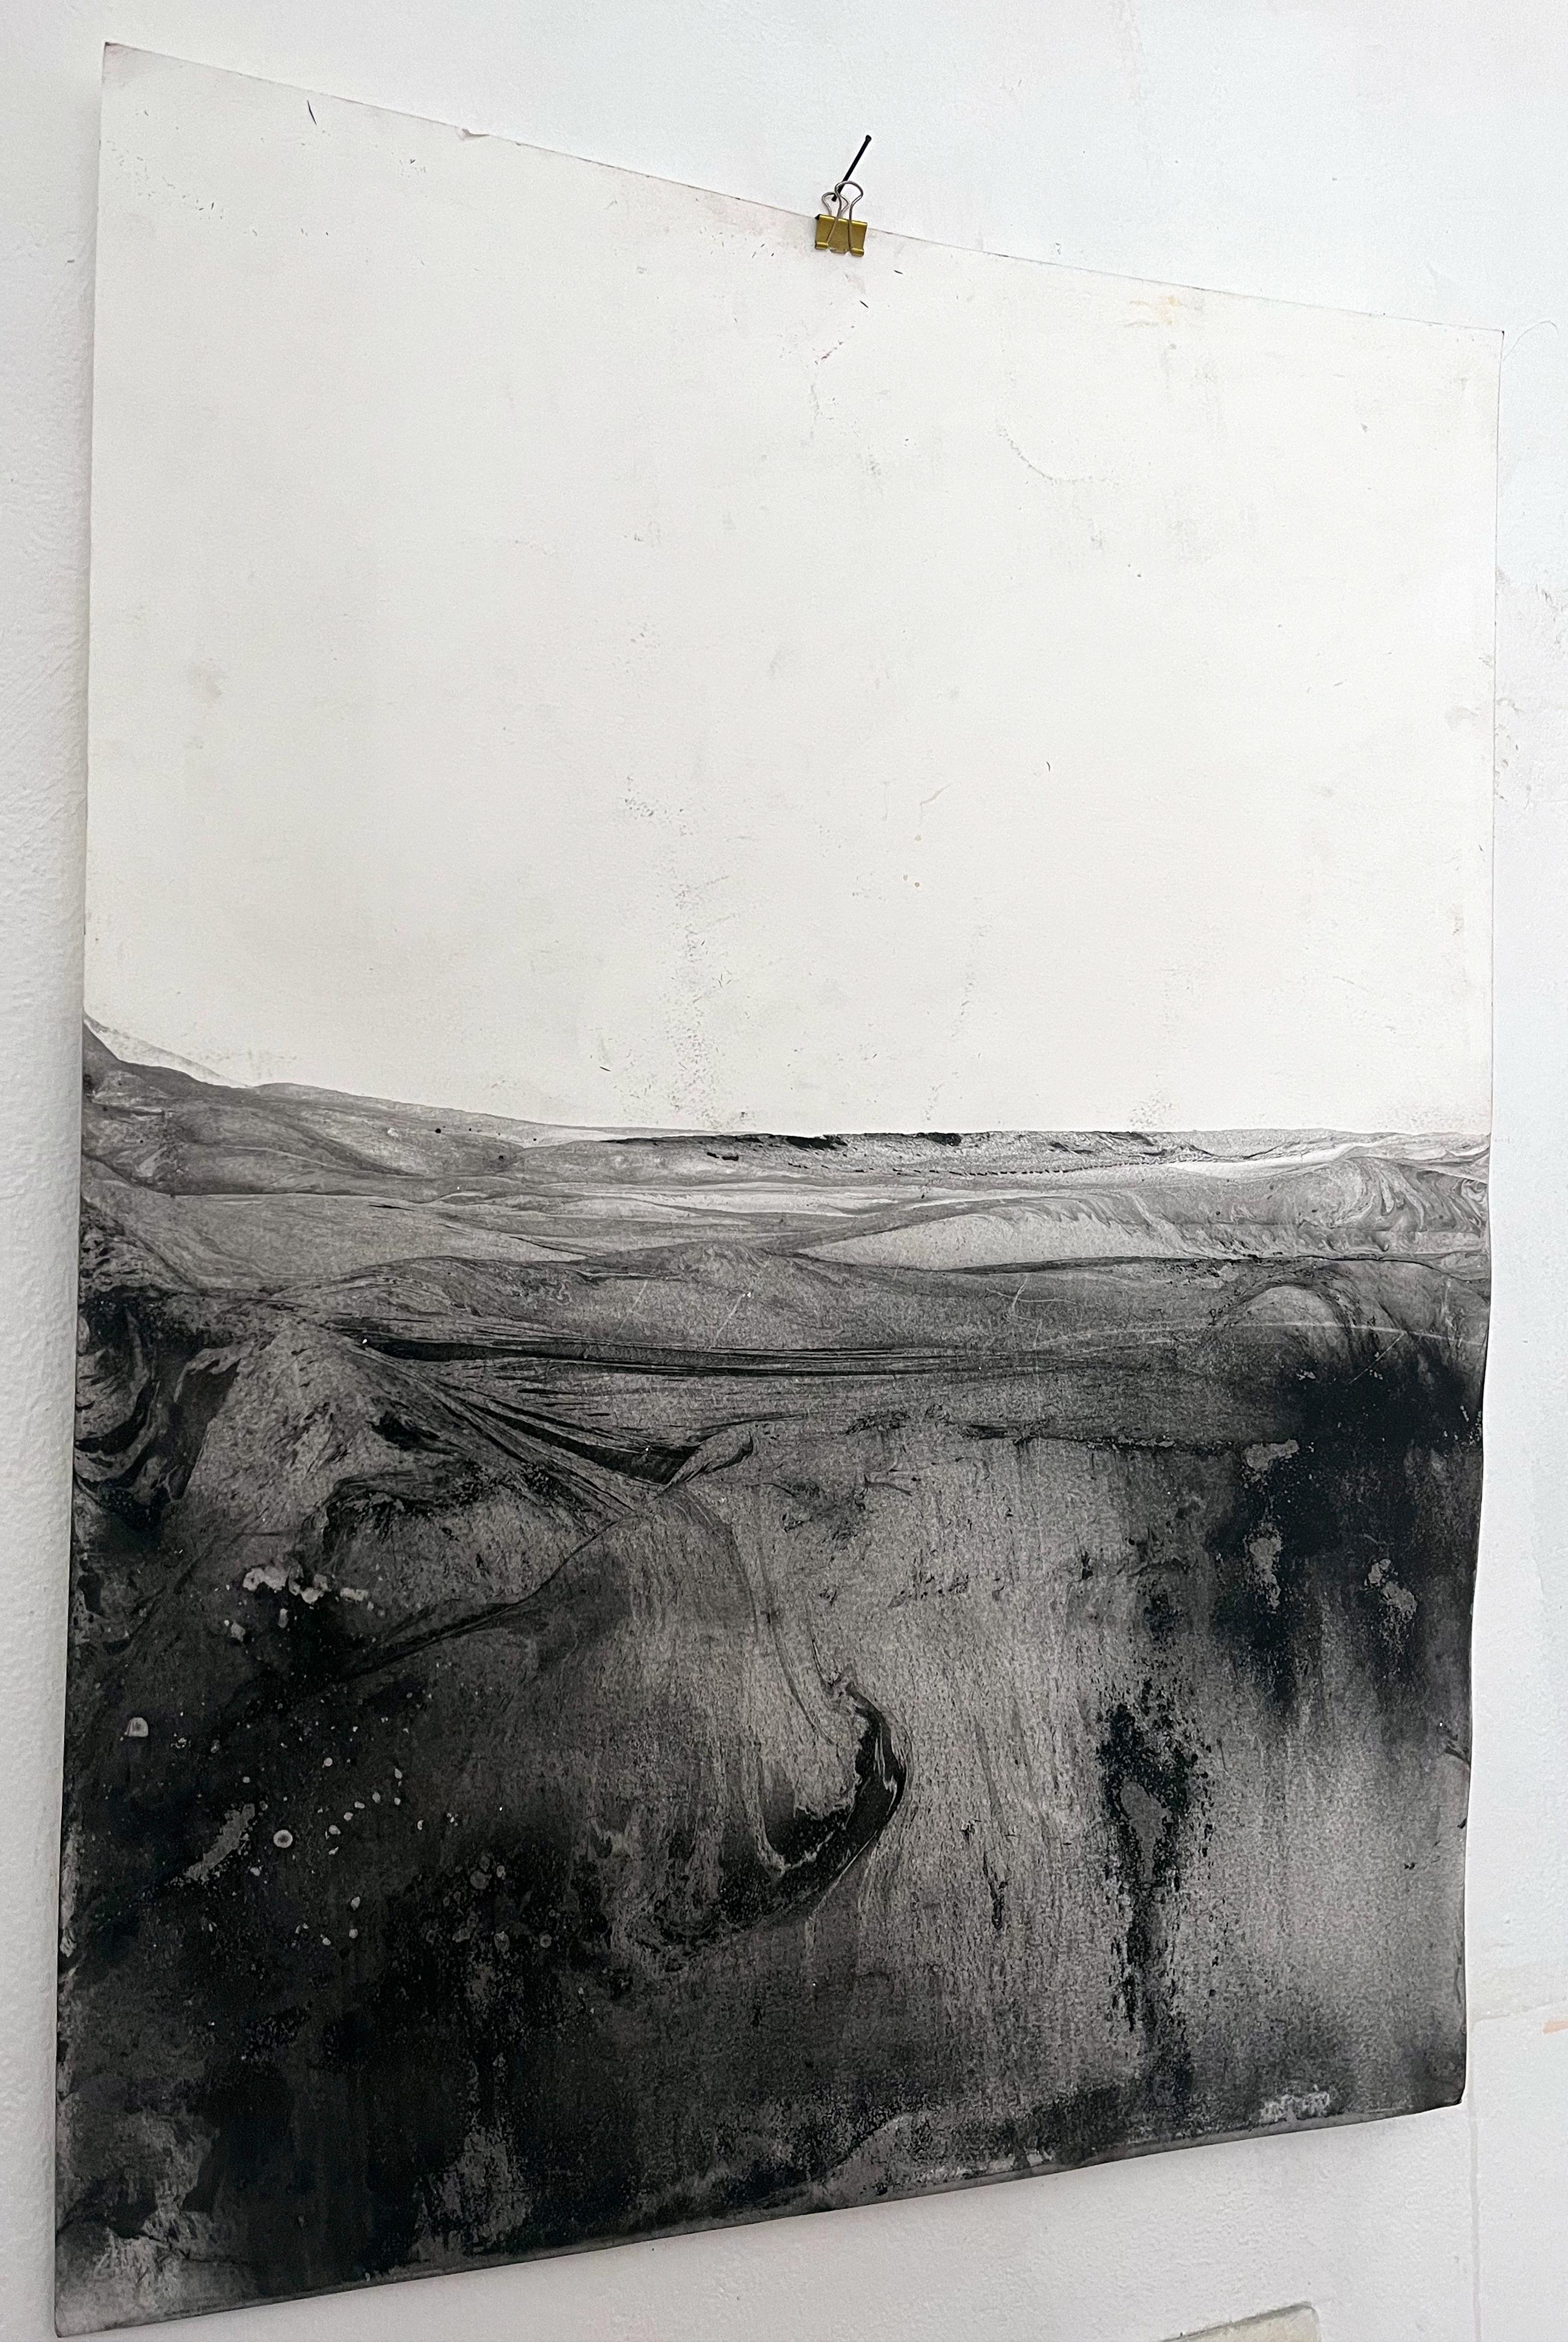 Landscape B/W
mineral oxide on Paper / Fabriano Rosaspina Paper
55x75 cm

one of a kind
the painting can be shipped with the frame ready to hang, or on a rigid support with passpartout.
framing options can be agreed with the buyer

Marilina